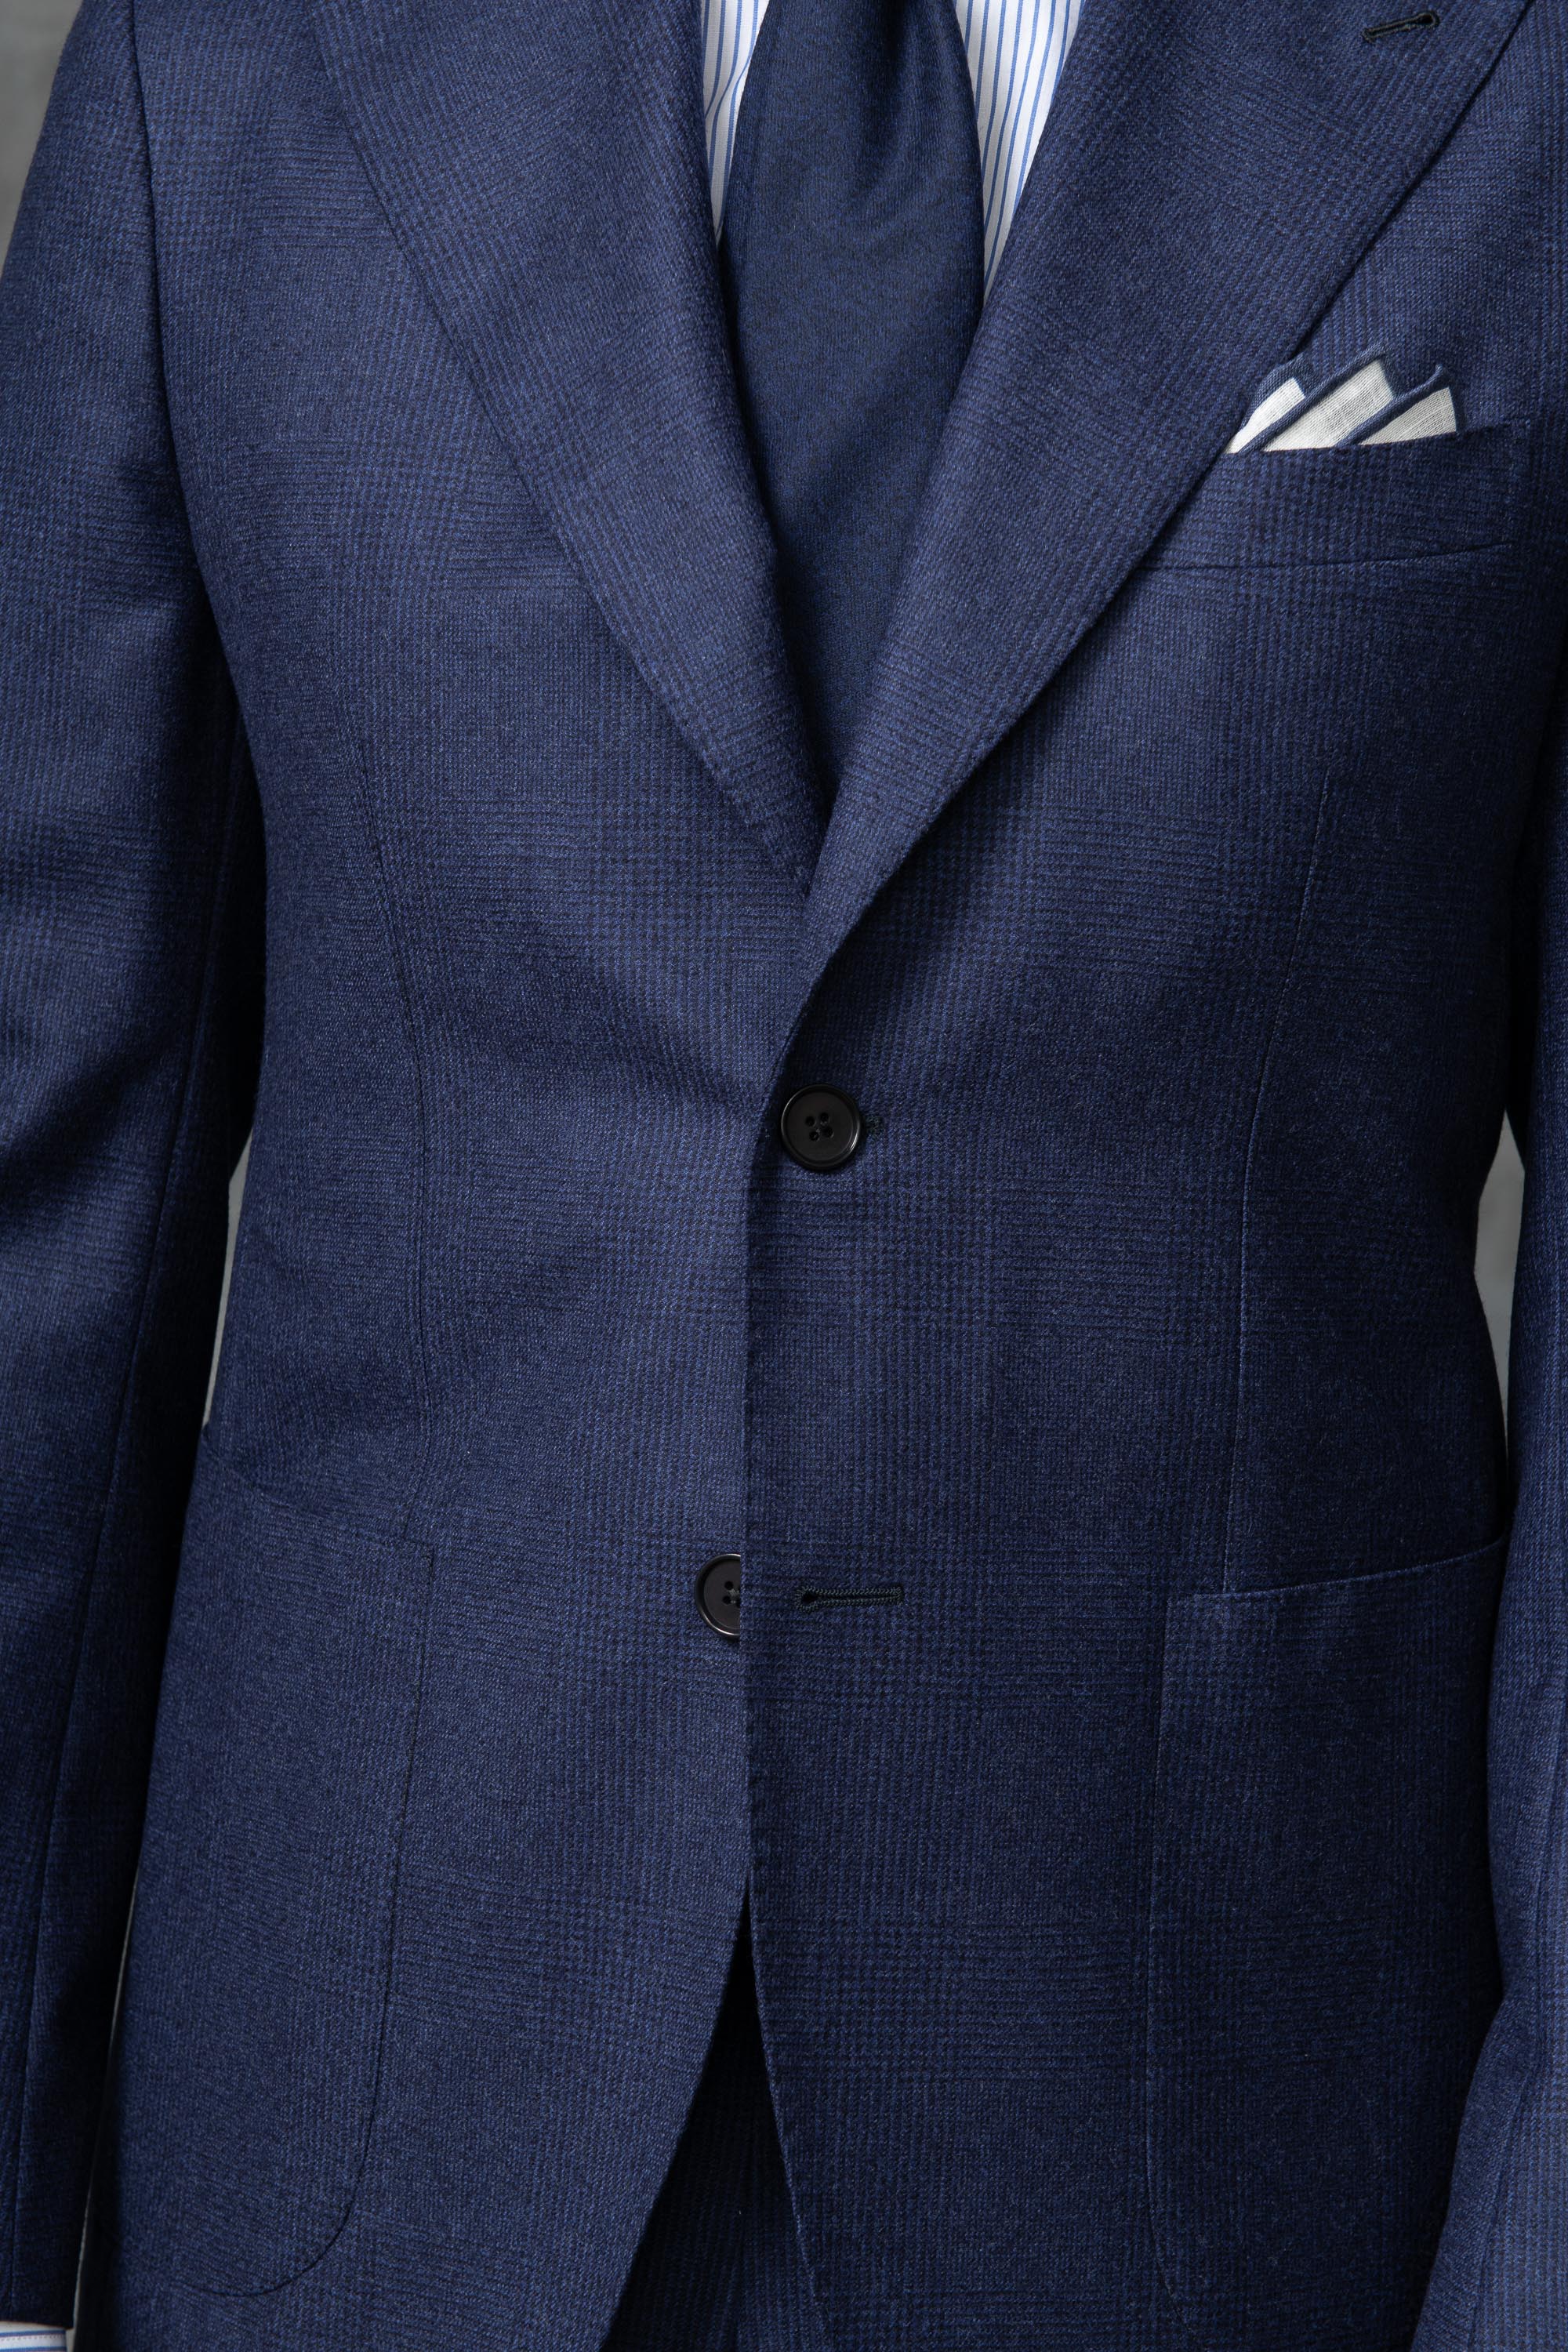 Blue prince of wales suit "Soragna Capsule Collection" - Made in Italy